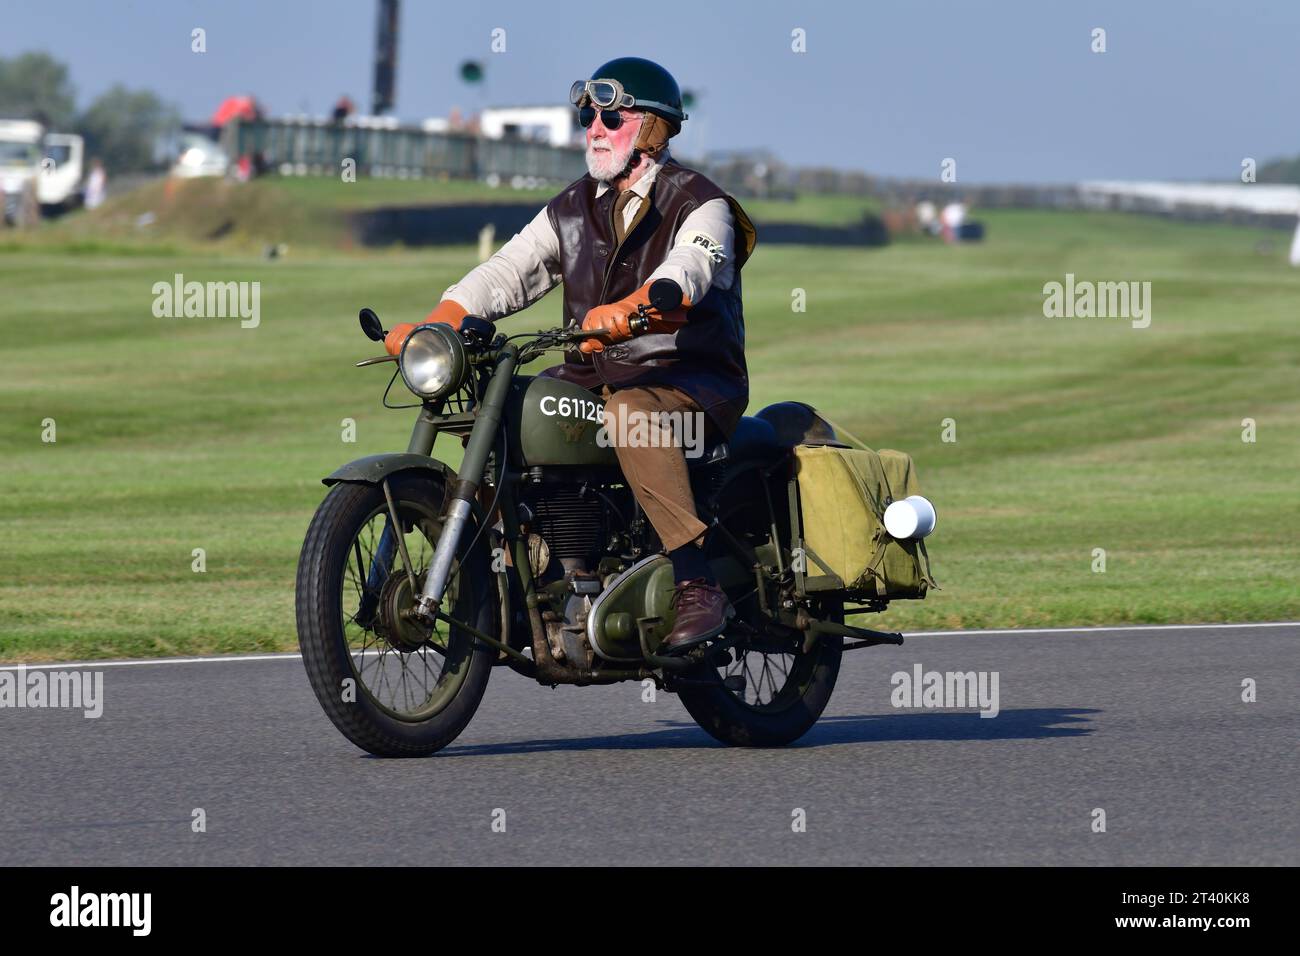 ex-military Matchless, Track Parade - Motorcycle Celebration, circa 200 bikes featured in the morning parade laps, including sidecar outfits and motor Stock Photo